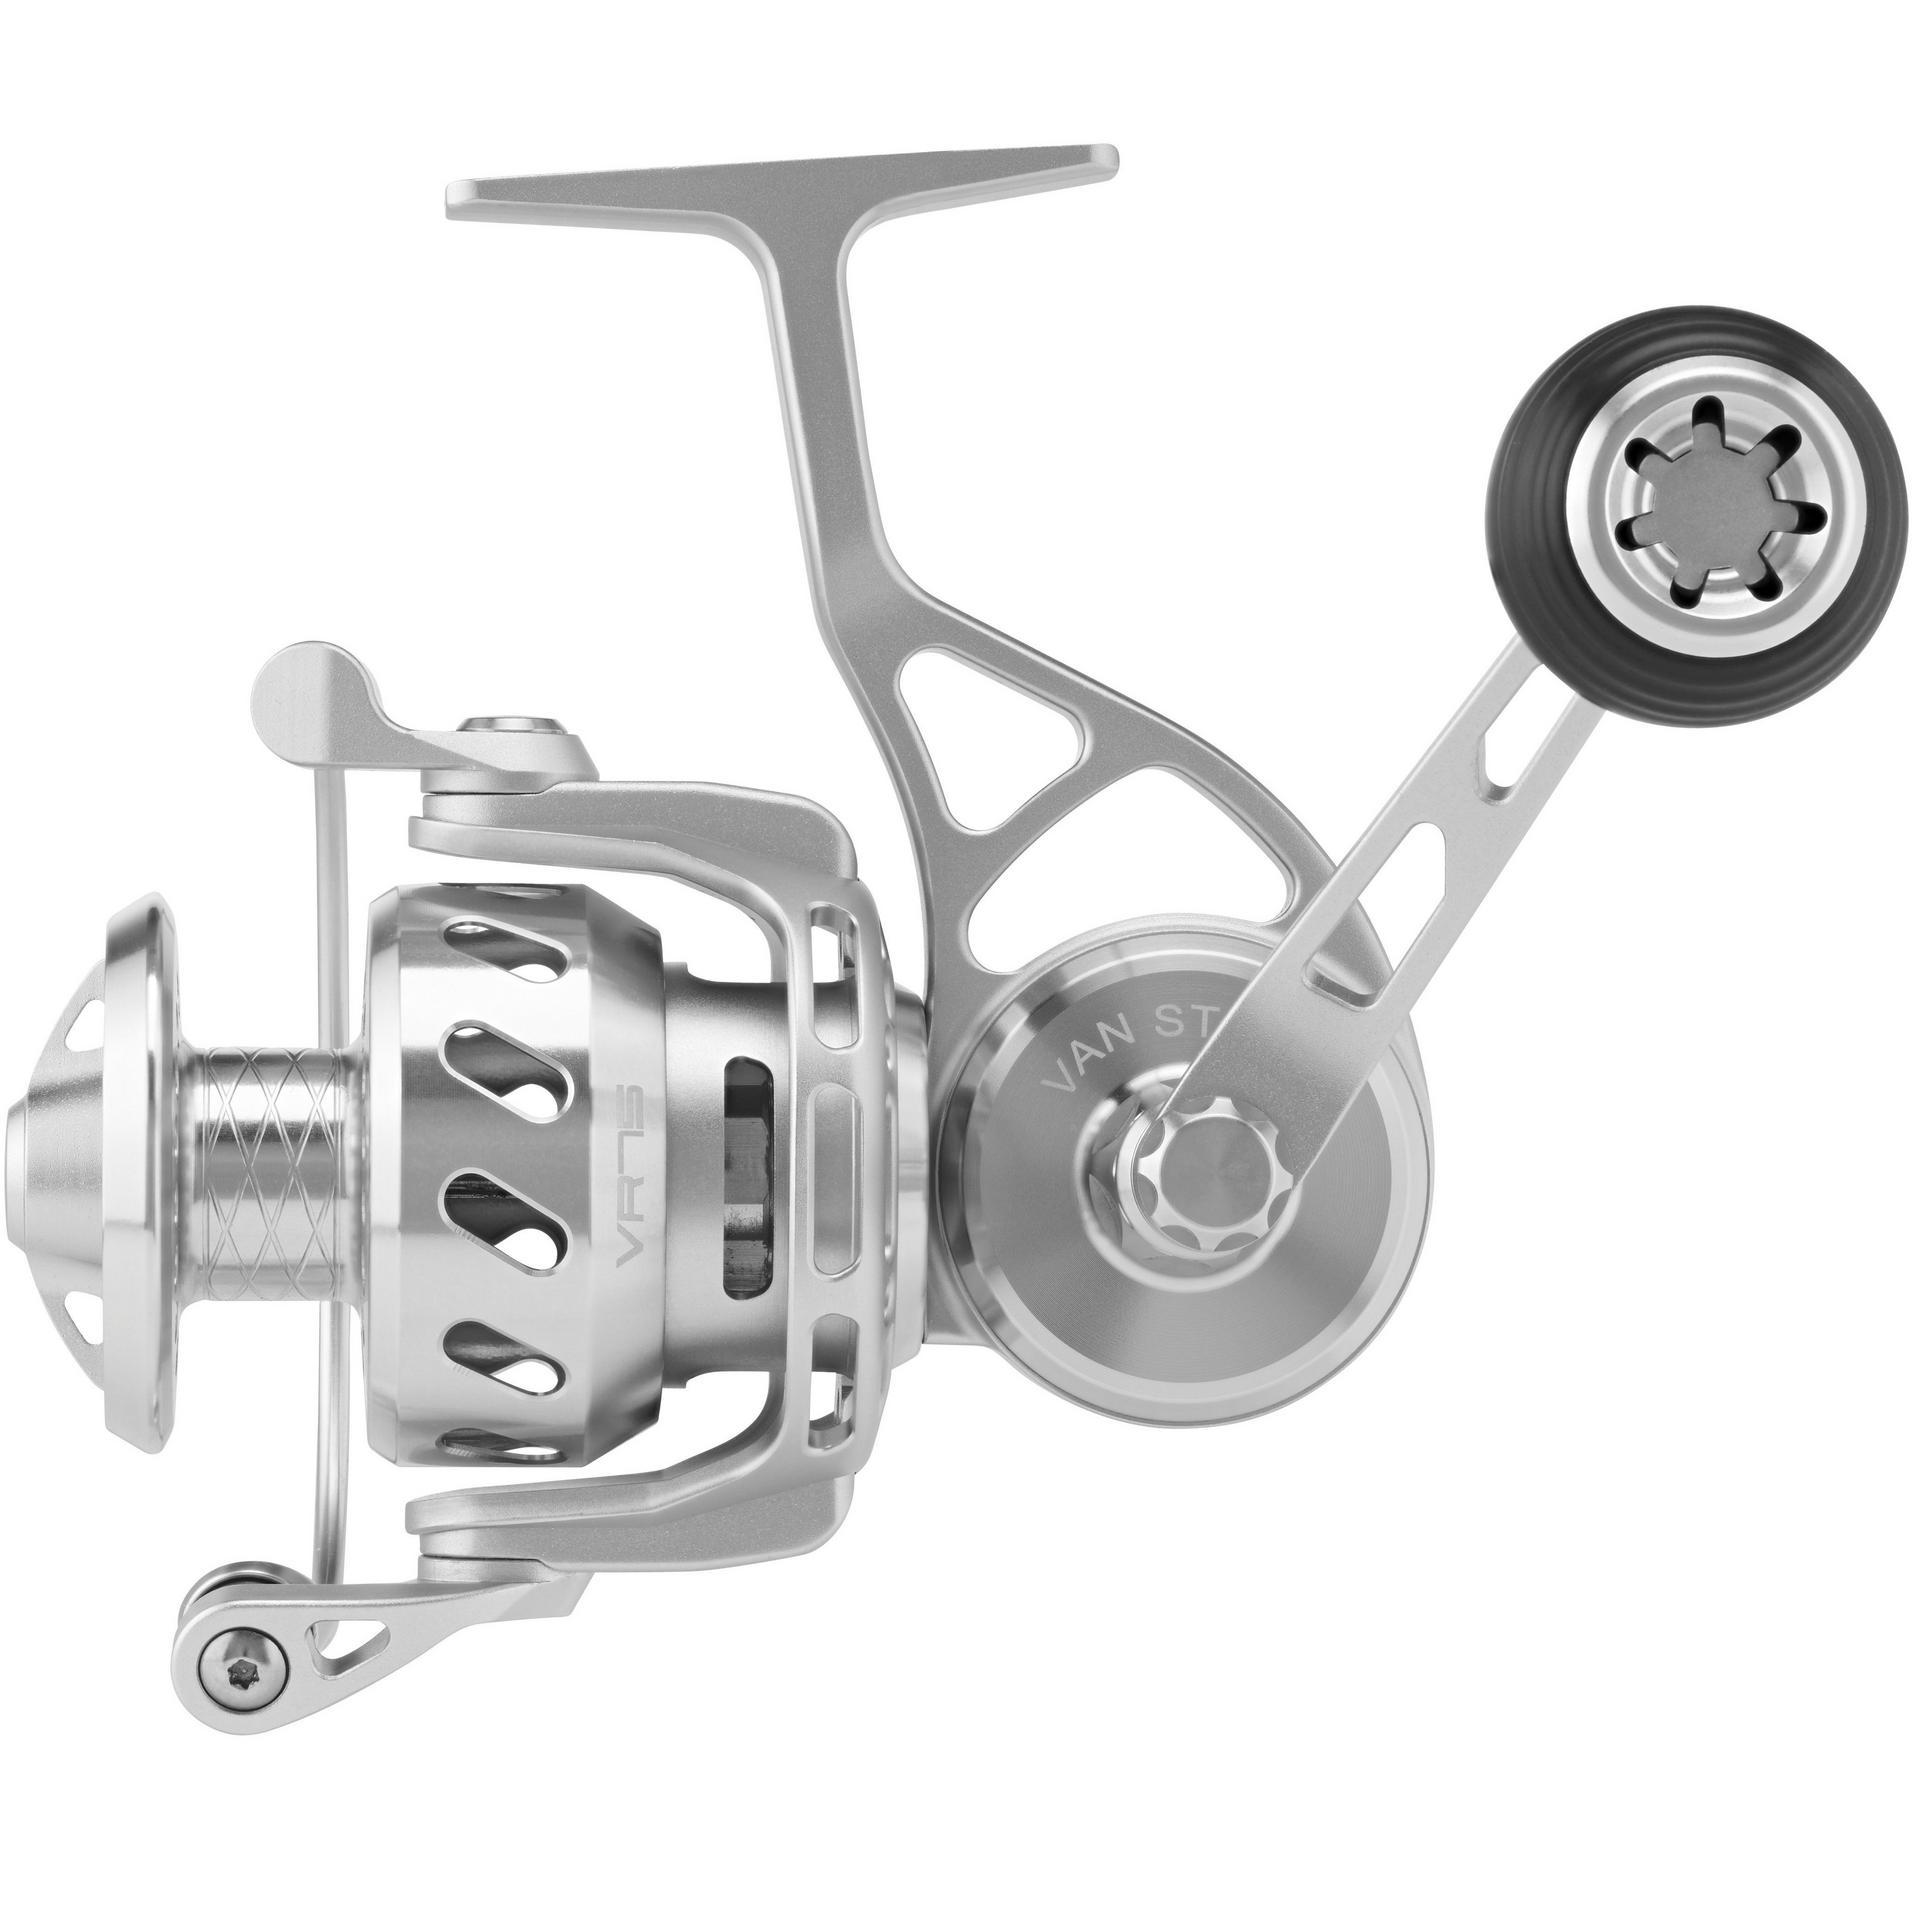 Van Staal VR Series Spinning Reels – Glasgow Angling Centre